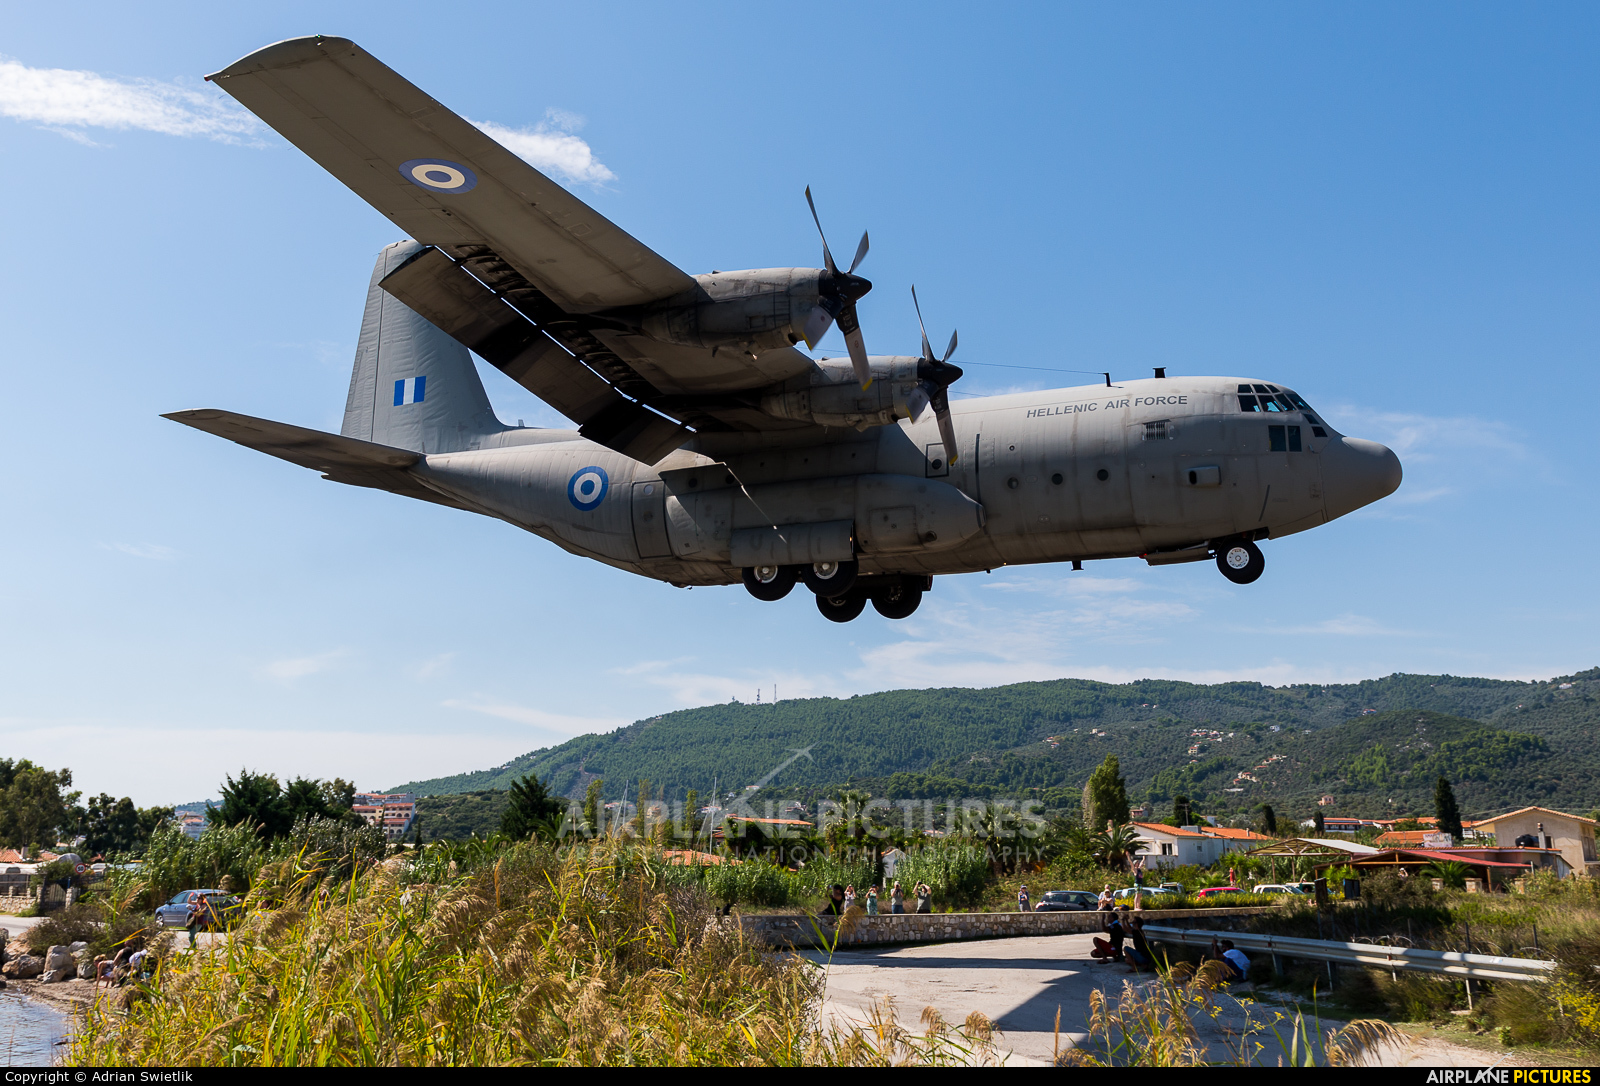 Greece - Hellenic Air Force 743 aircraft at Skiathos